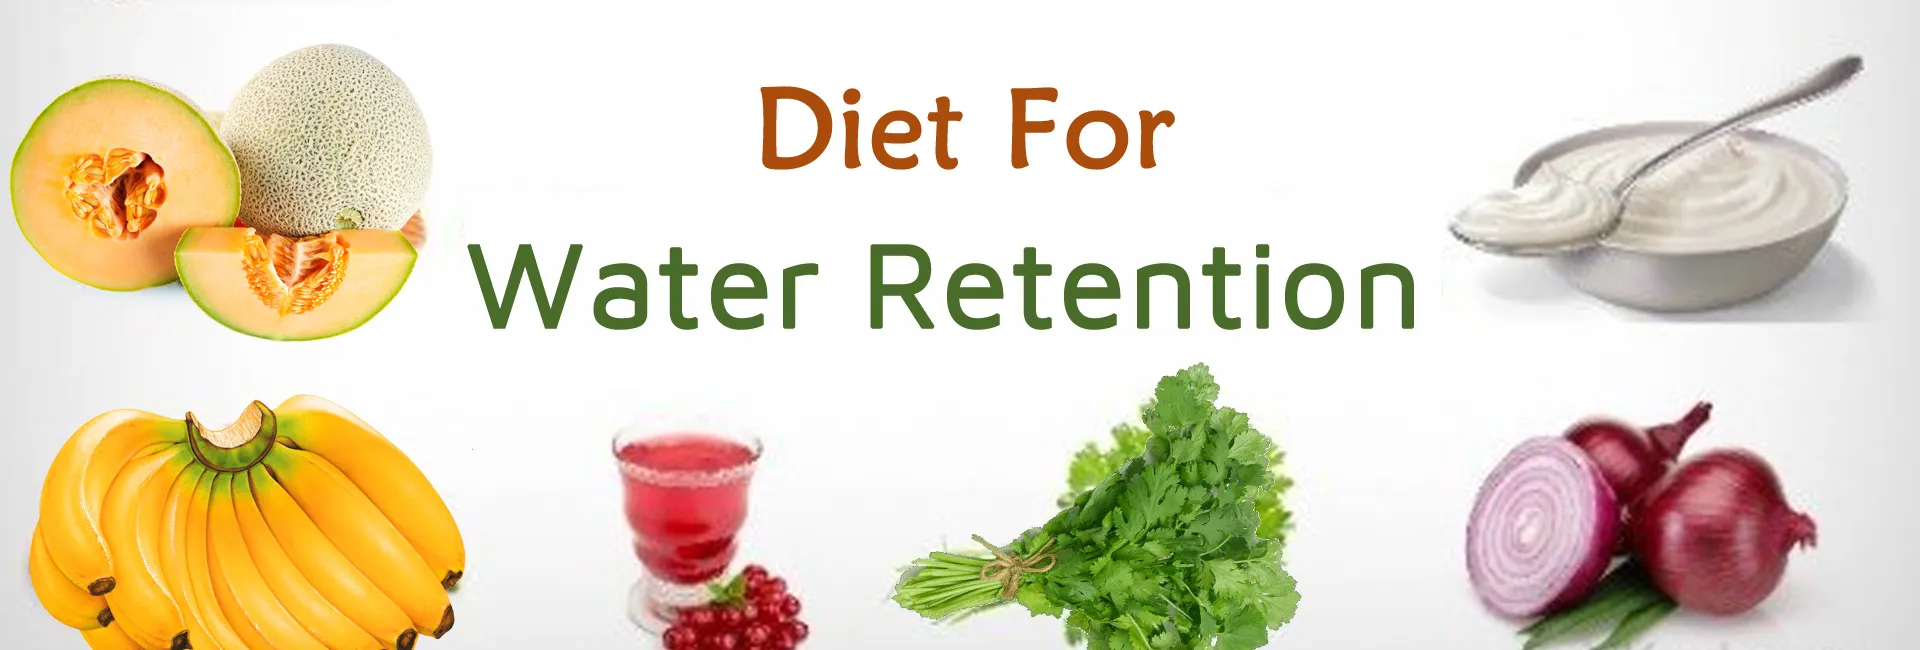 Diet For Water Retention In Abu Dhabi